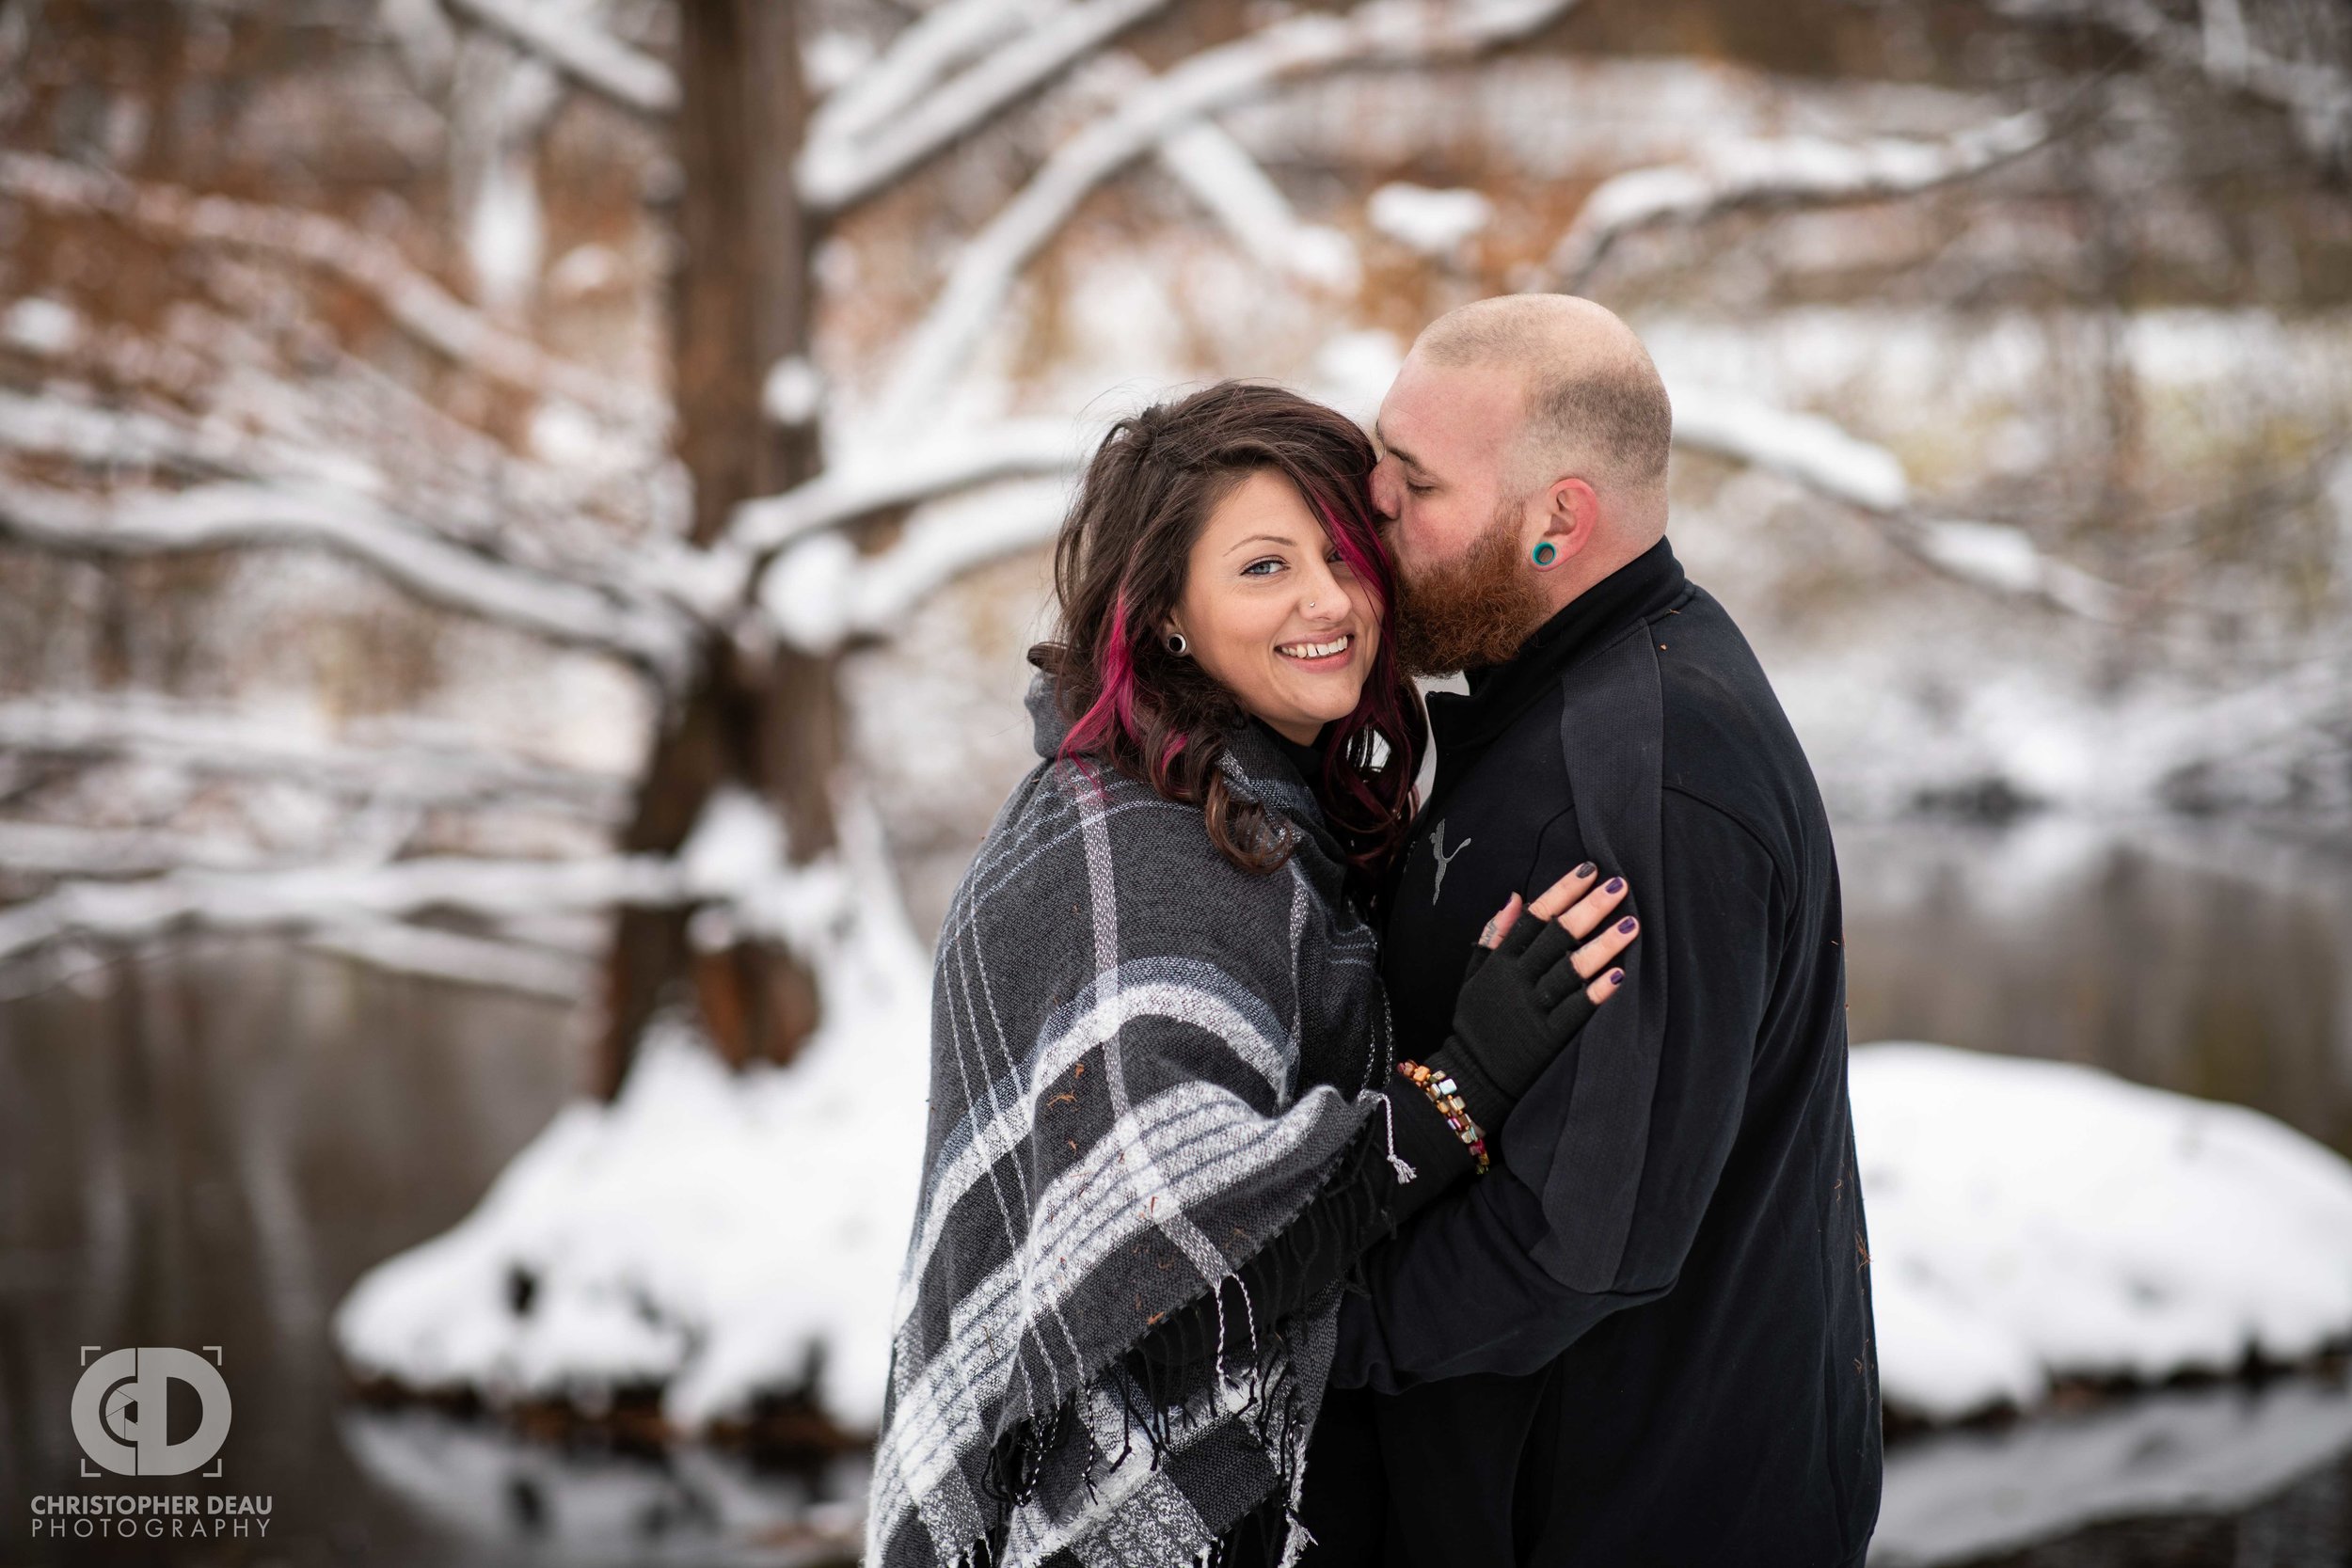  Man kisses a woman’s head as she smiles at the camera with a stream and tree in background 